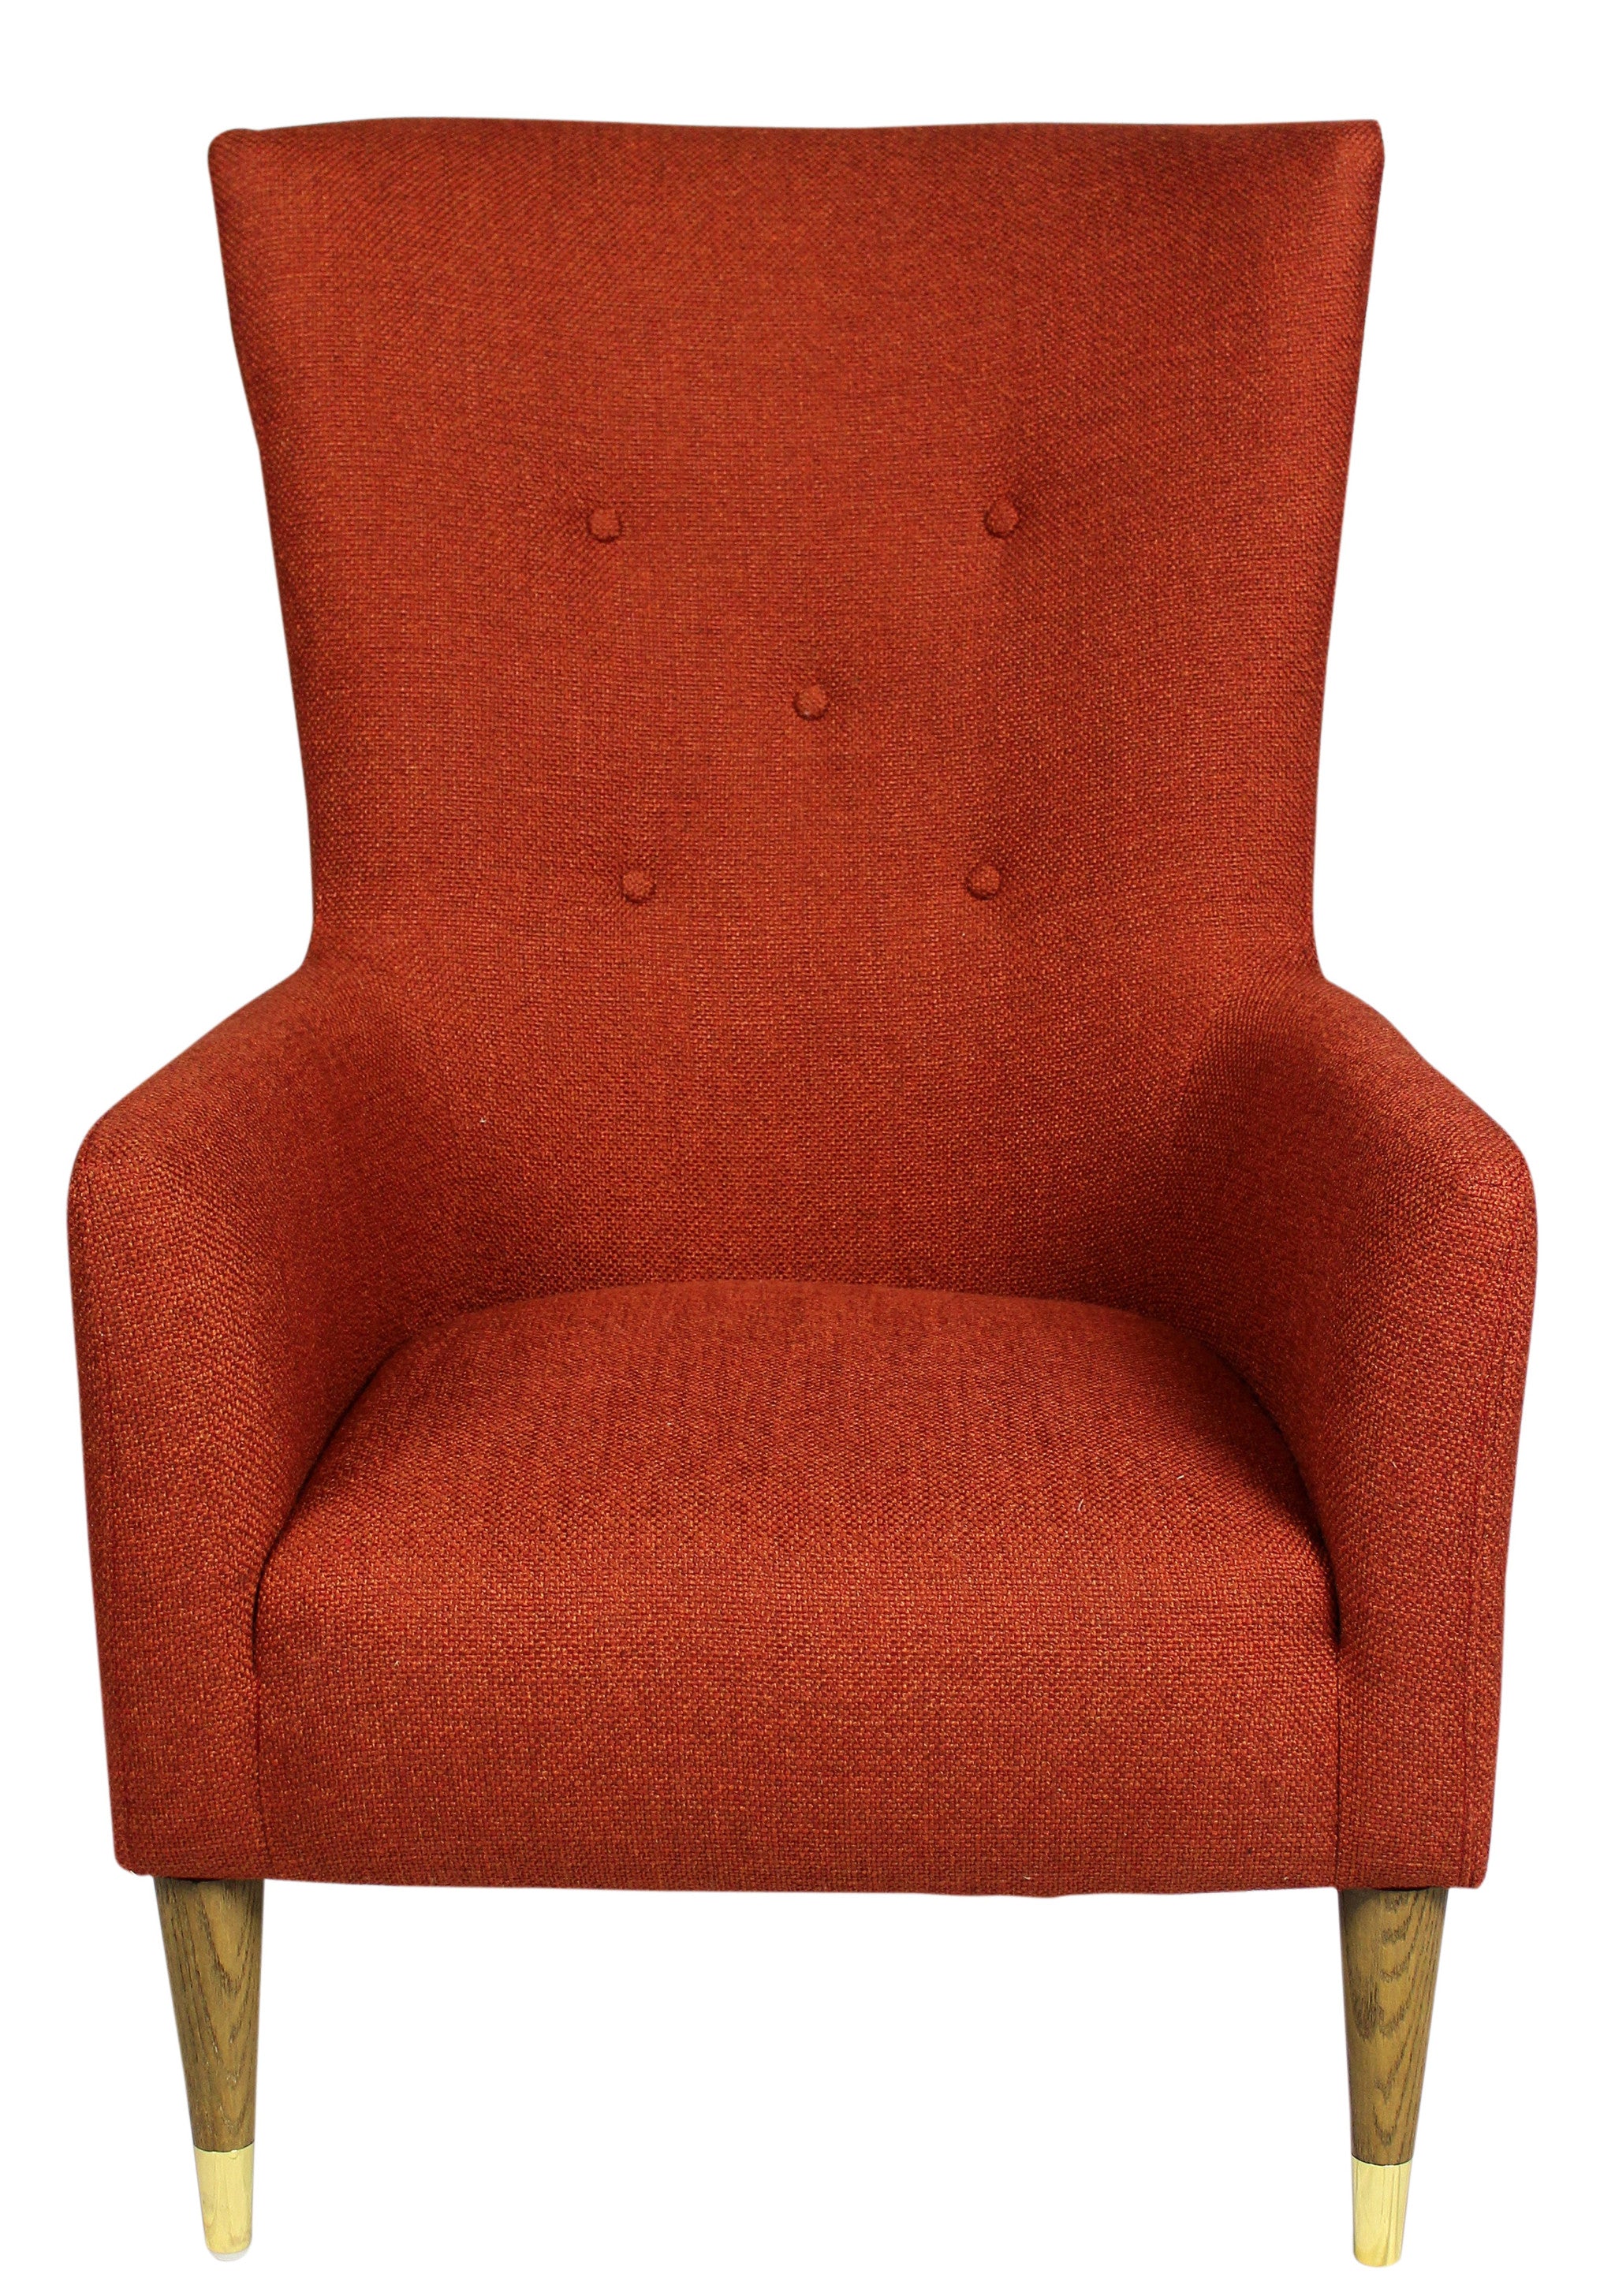 28" Orange And Natural Solid Color Lounge Chair